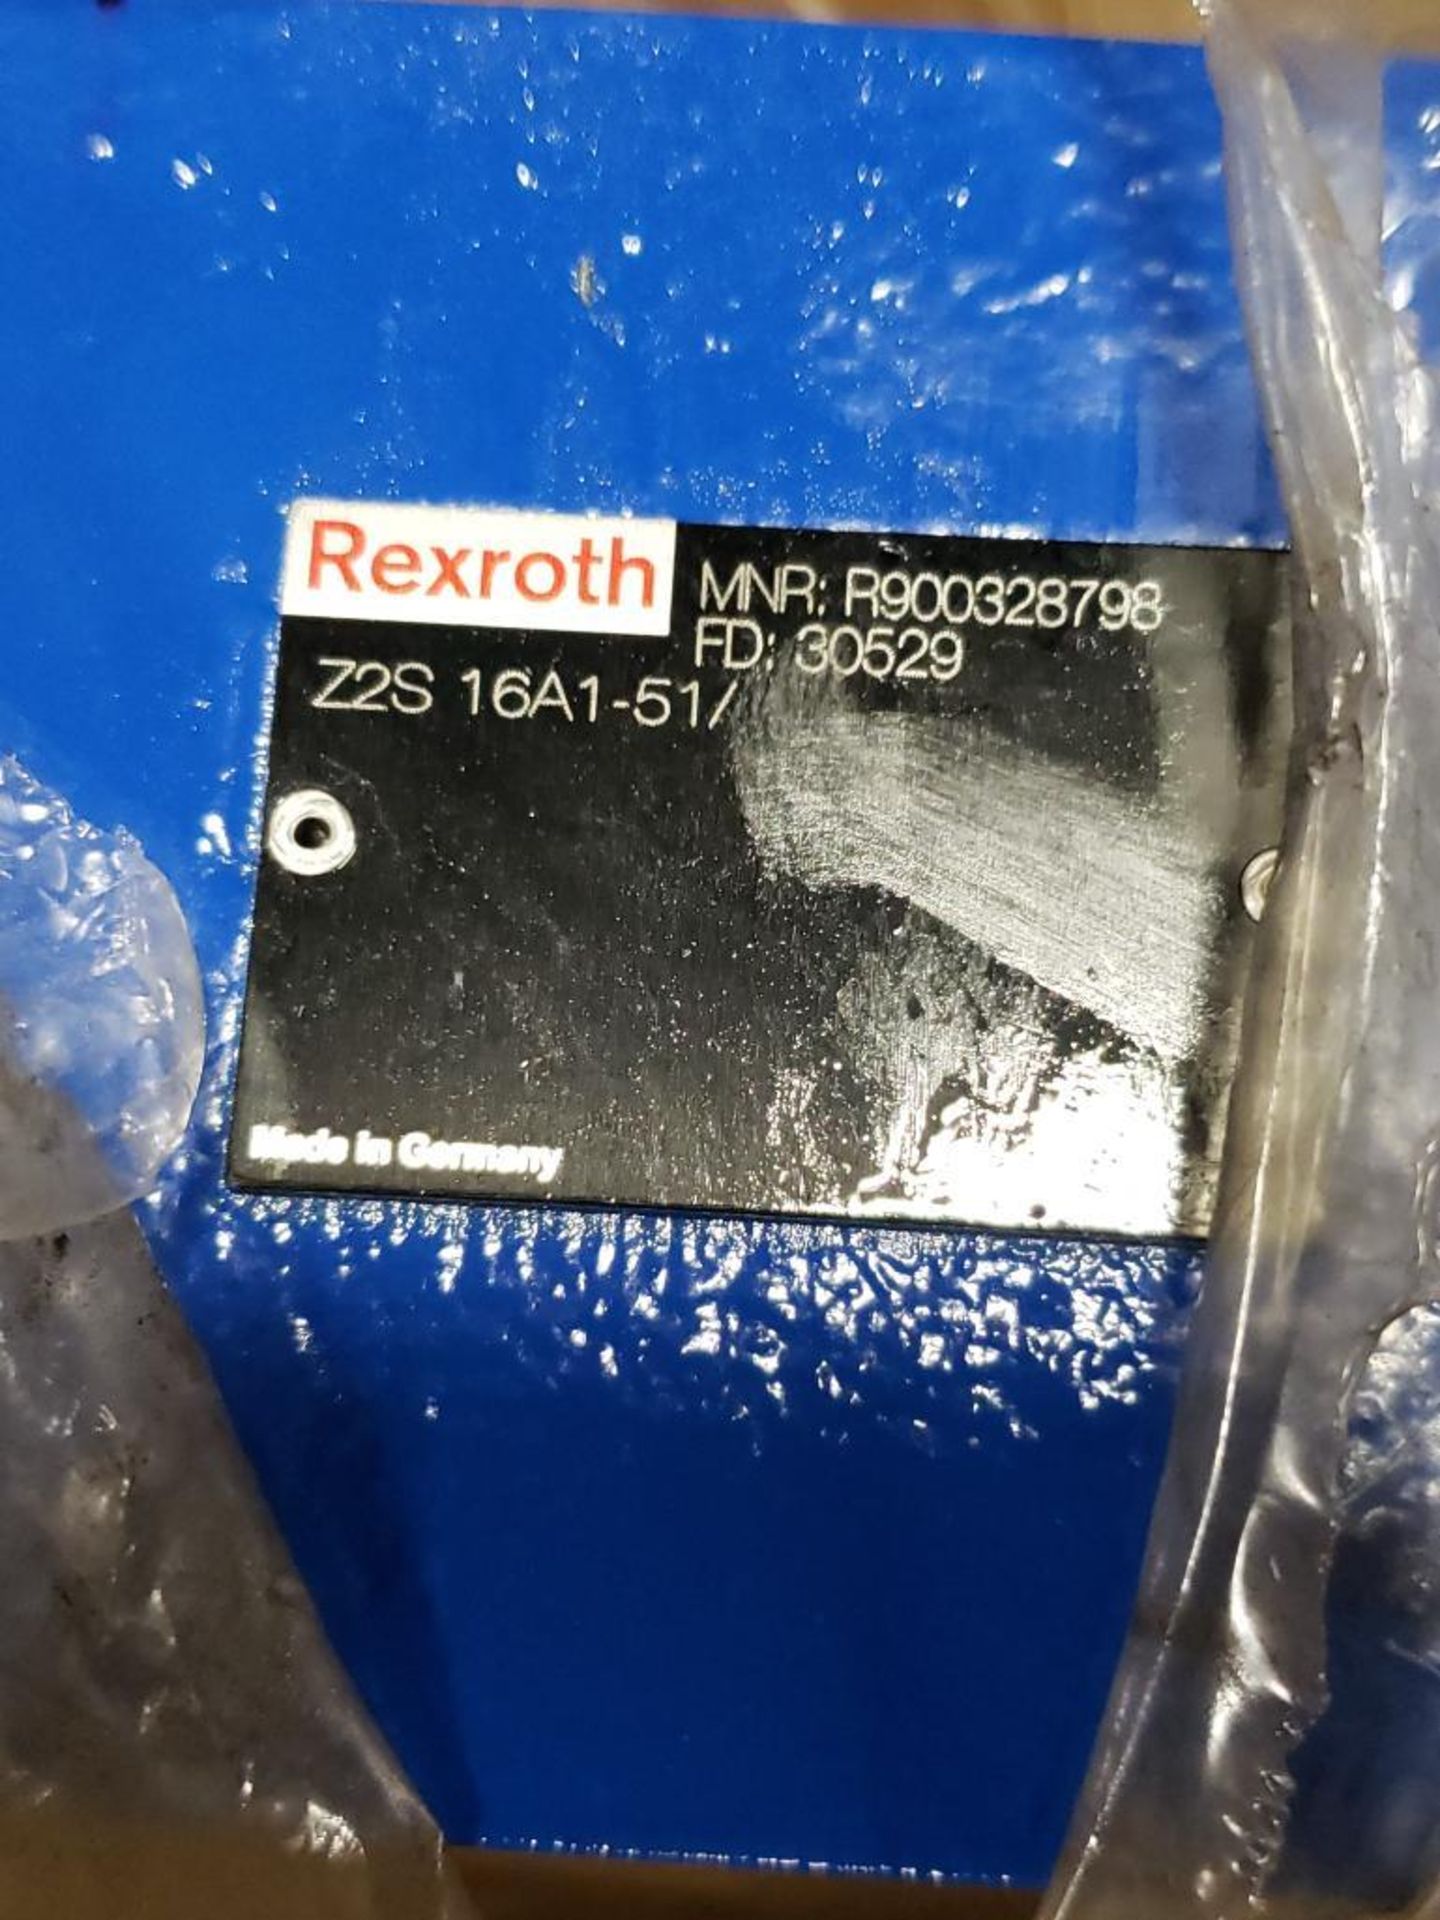 Rexroth hydraulic valve body. Part number Z2FS16A1-51// Appears to be new old stock. - Image 2 of 2